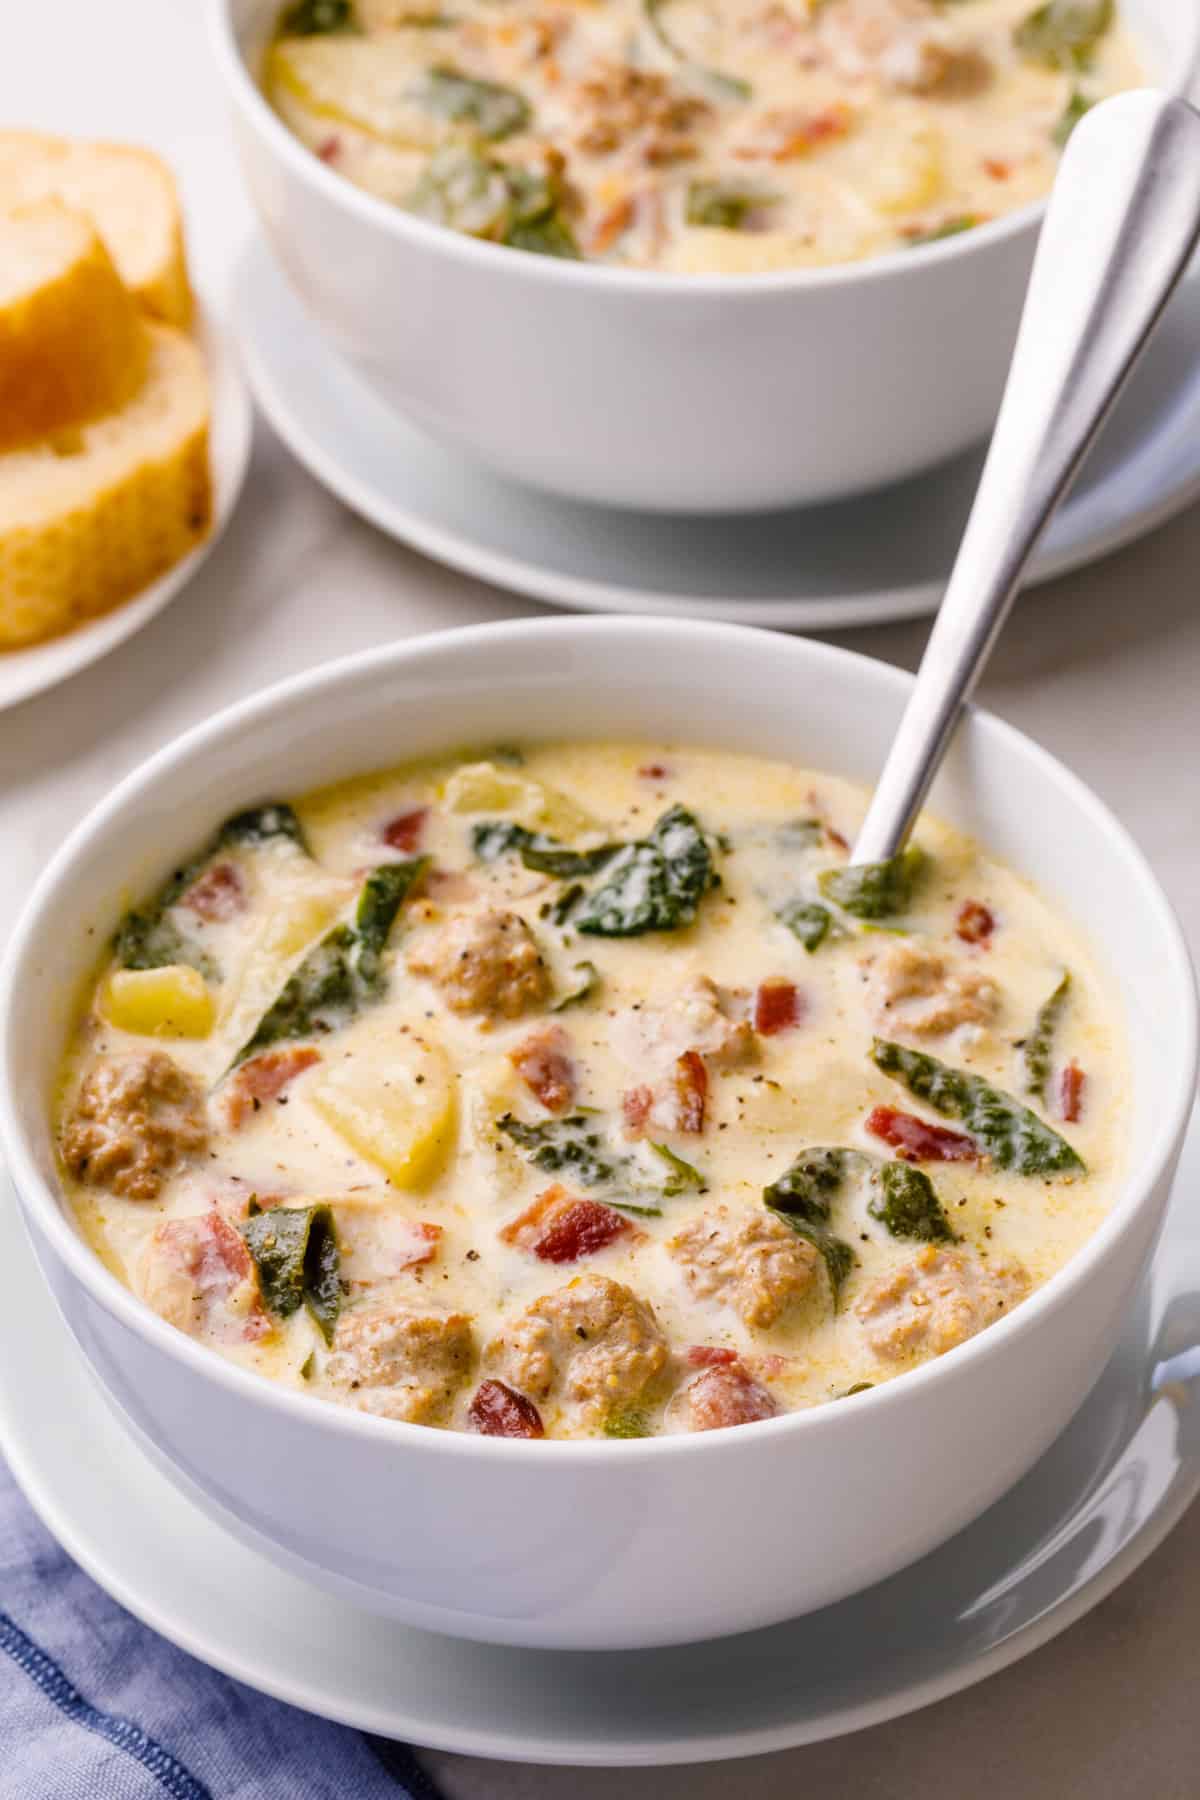 bowl of warm olive garden copycat recipe for zuppa toscana soup served in a white bowl with a silver spoon